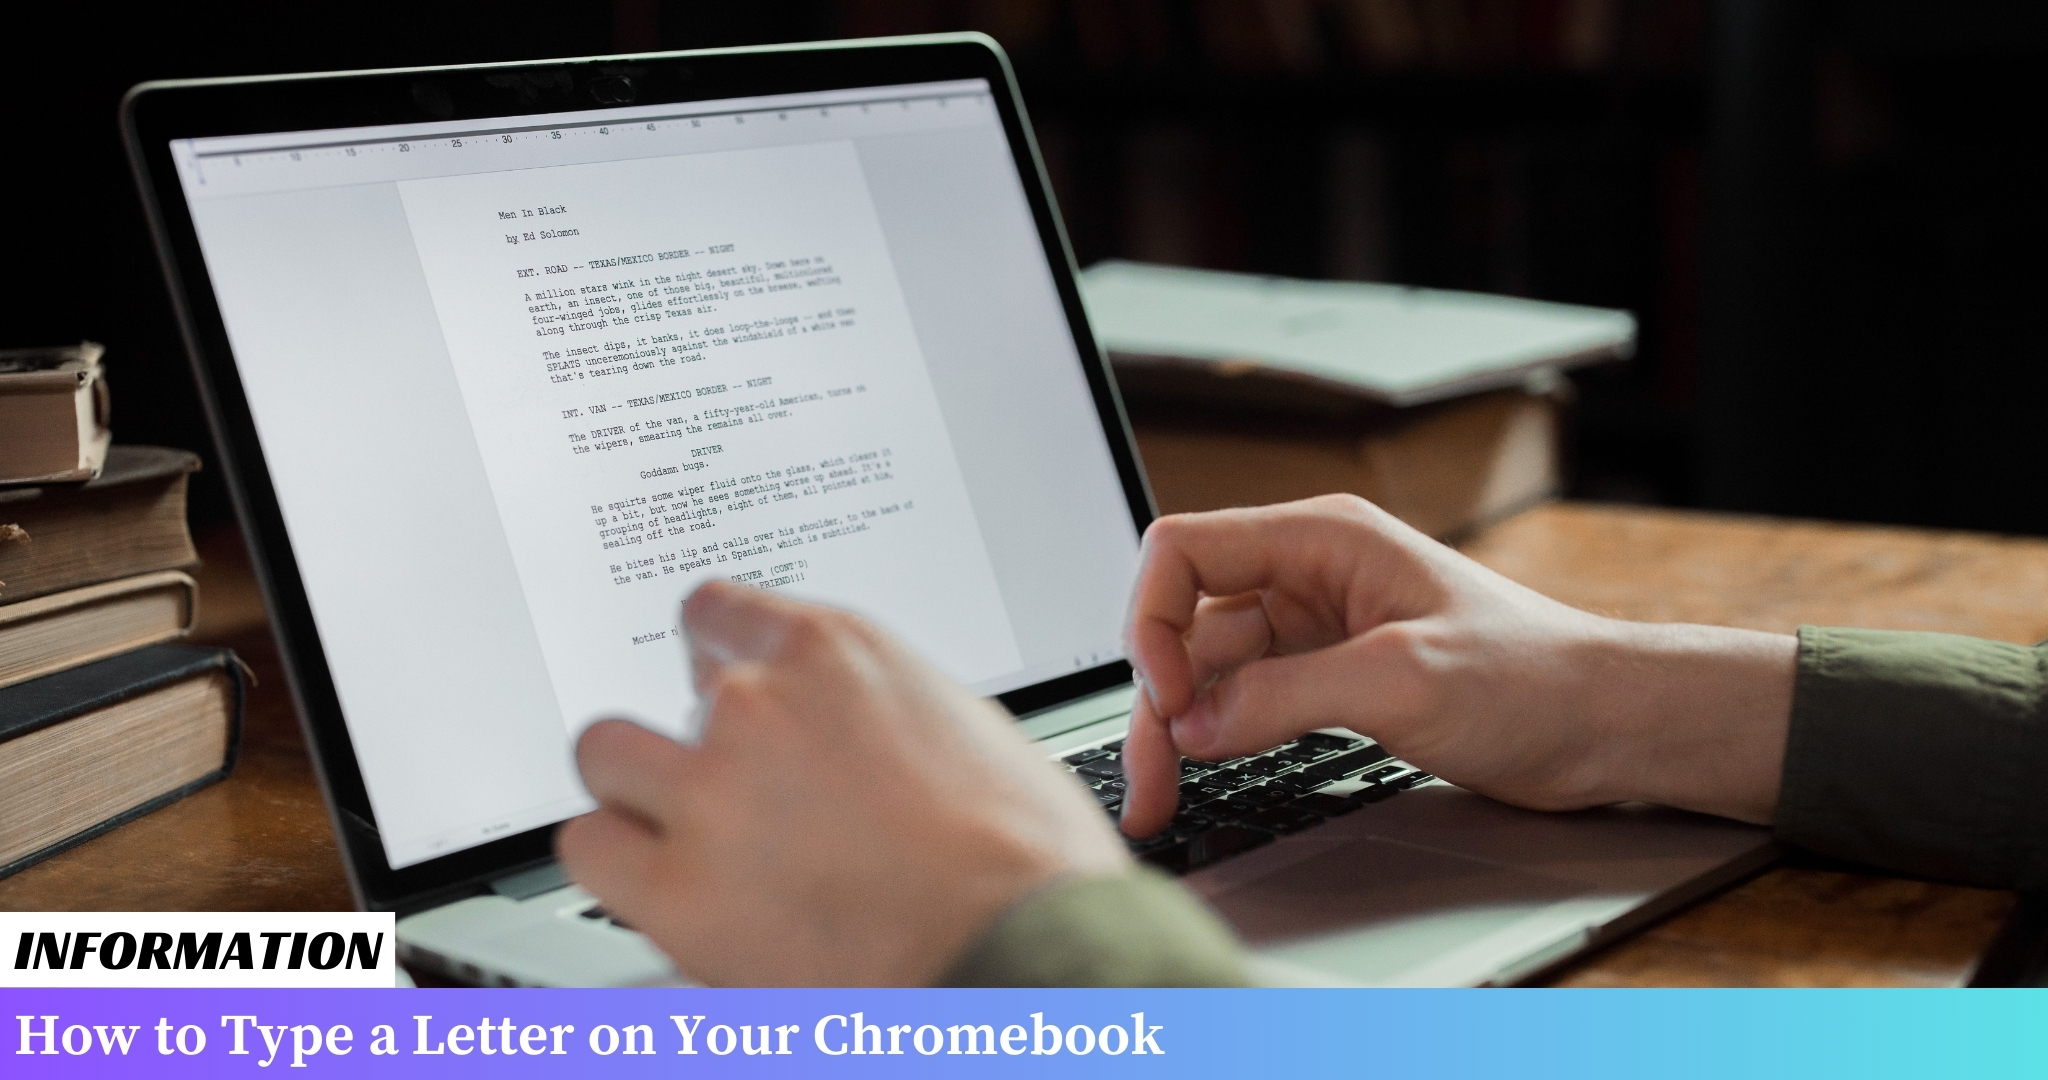 A step-by-step guide on typing a letter on your Chromebook. Learn the process of creating a letter using your Chromebook efficiently.